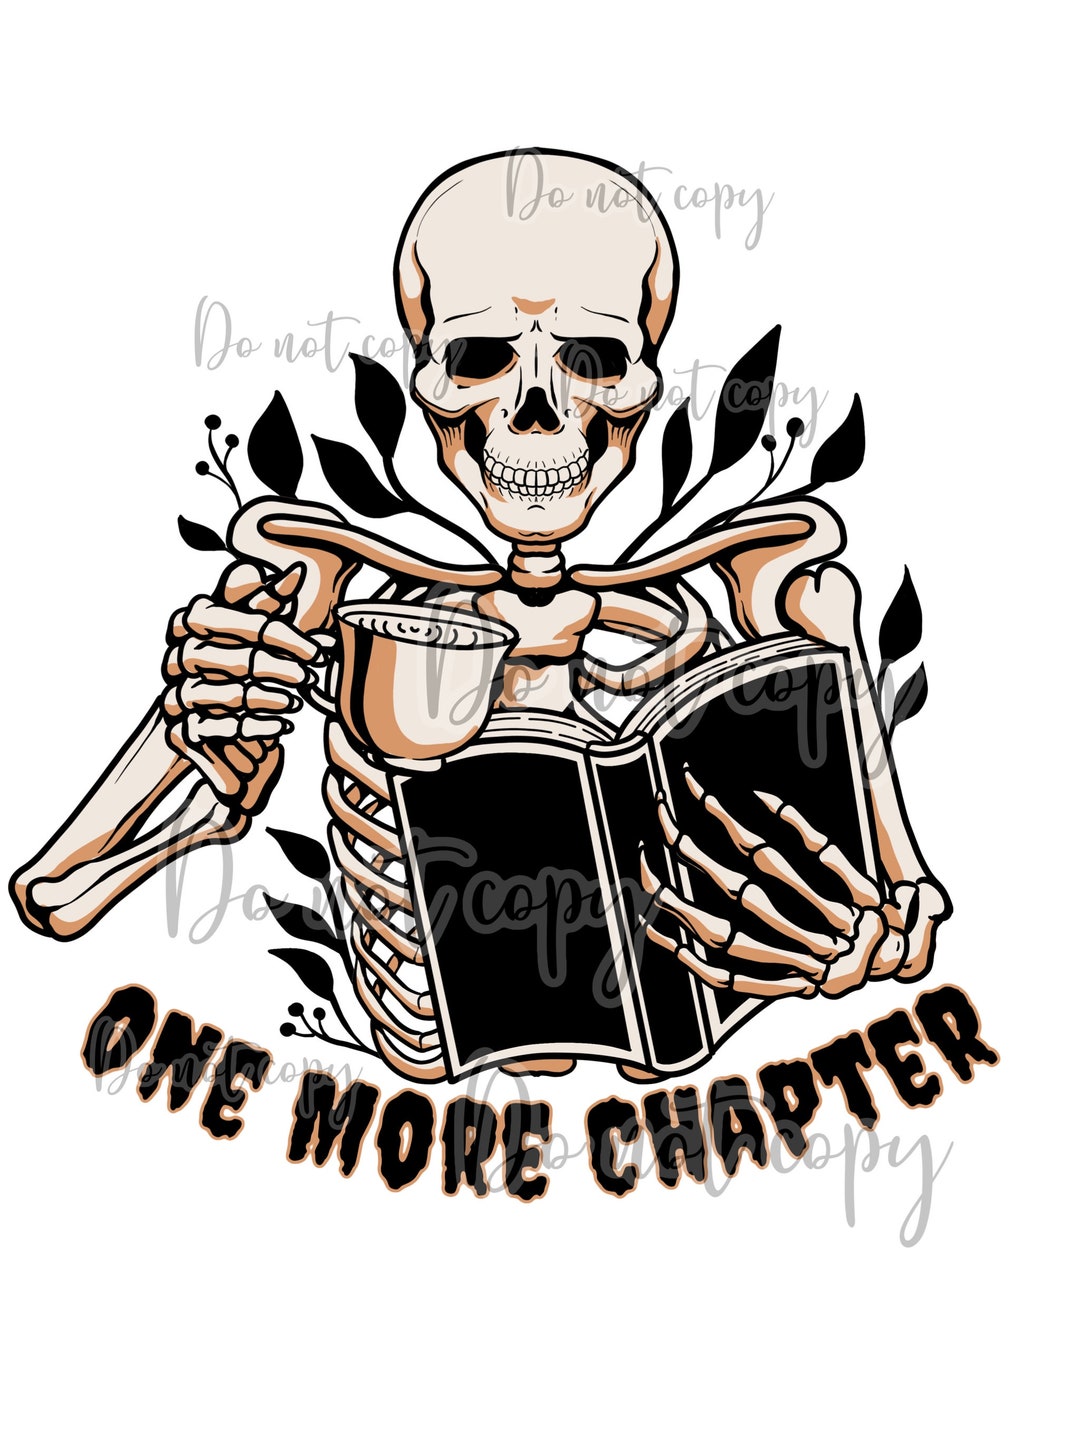 Resolution　Chapter　One　More　Book　High　Skeleton　Etsy　Coffee　Reading